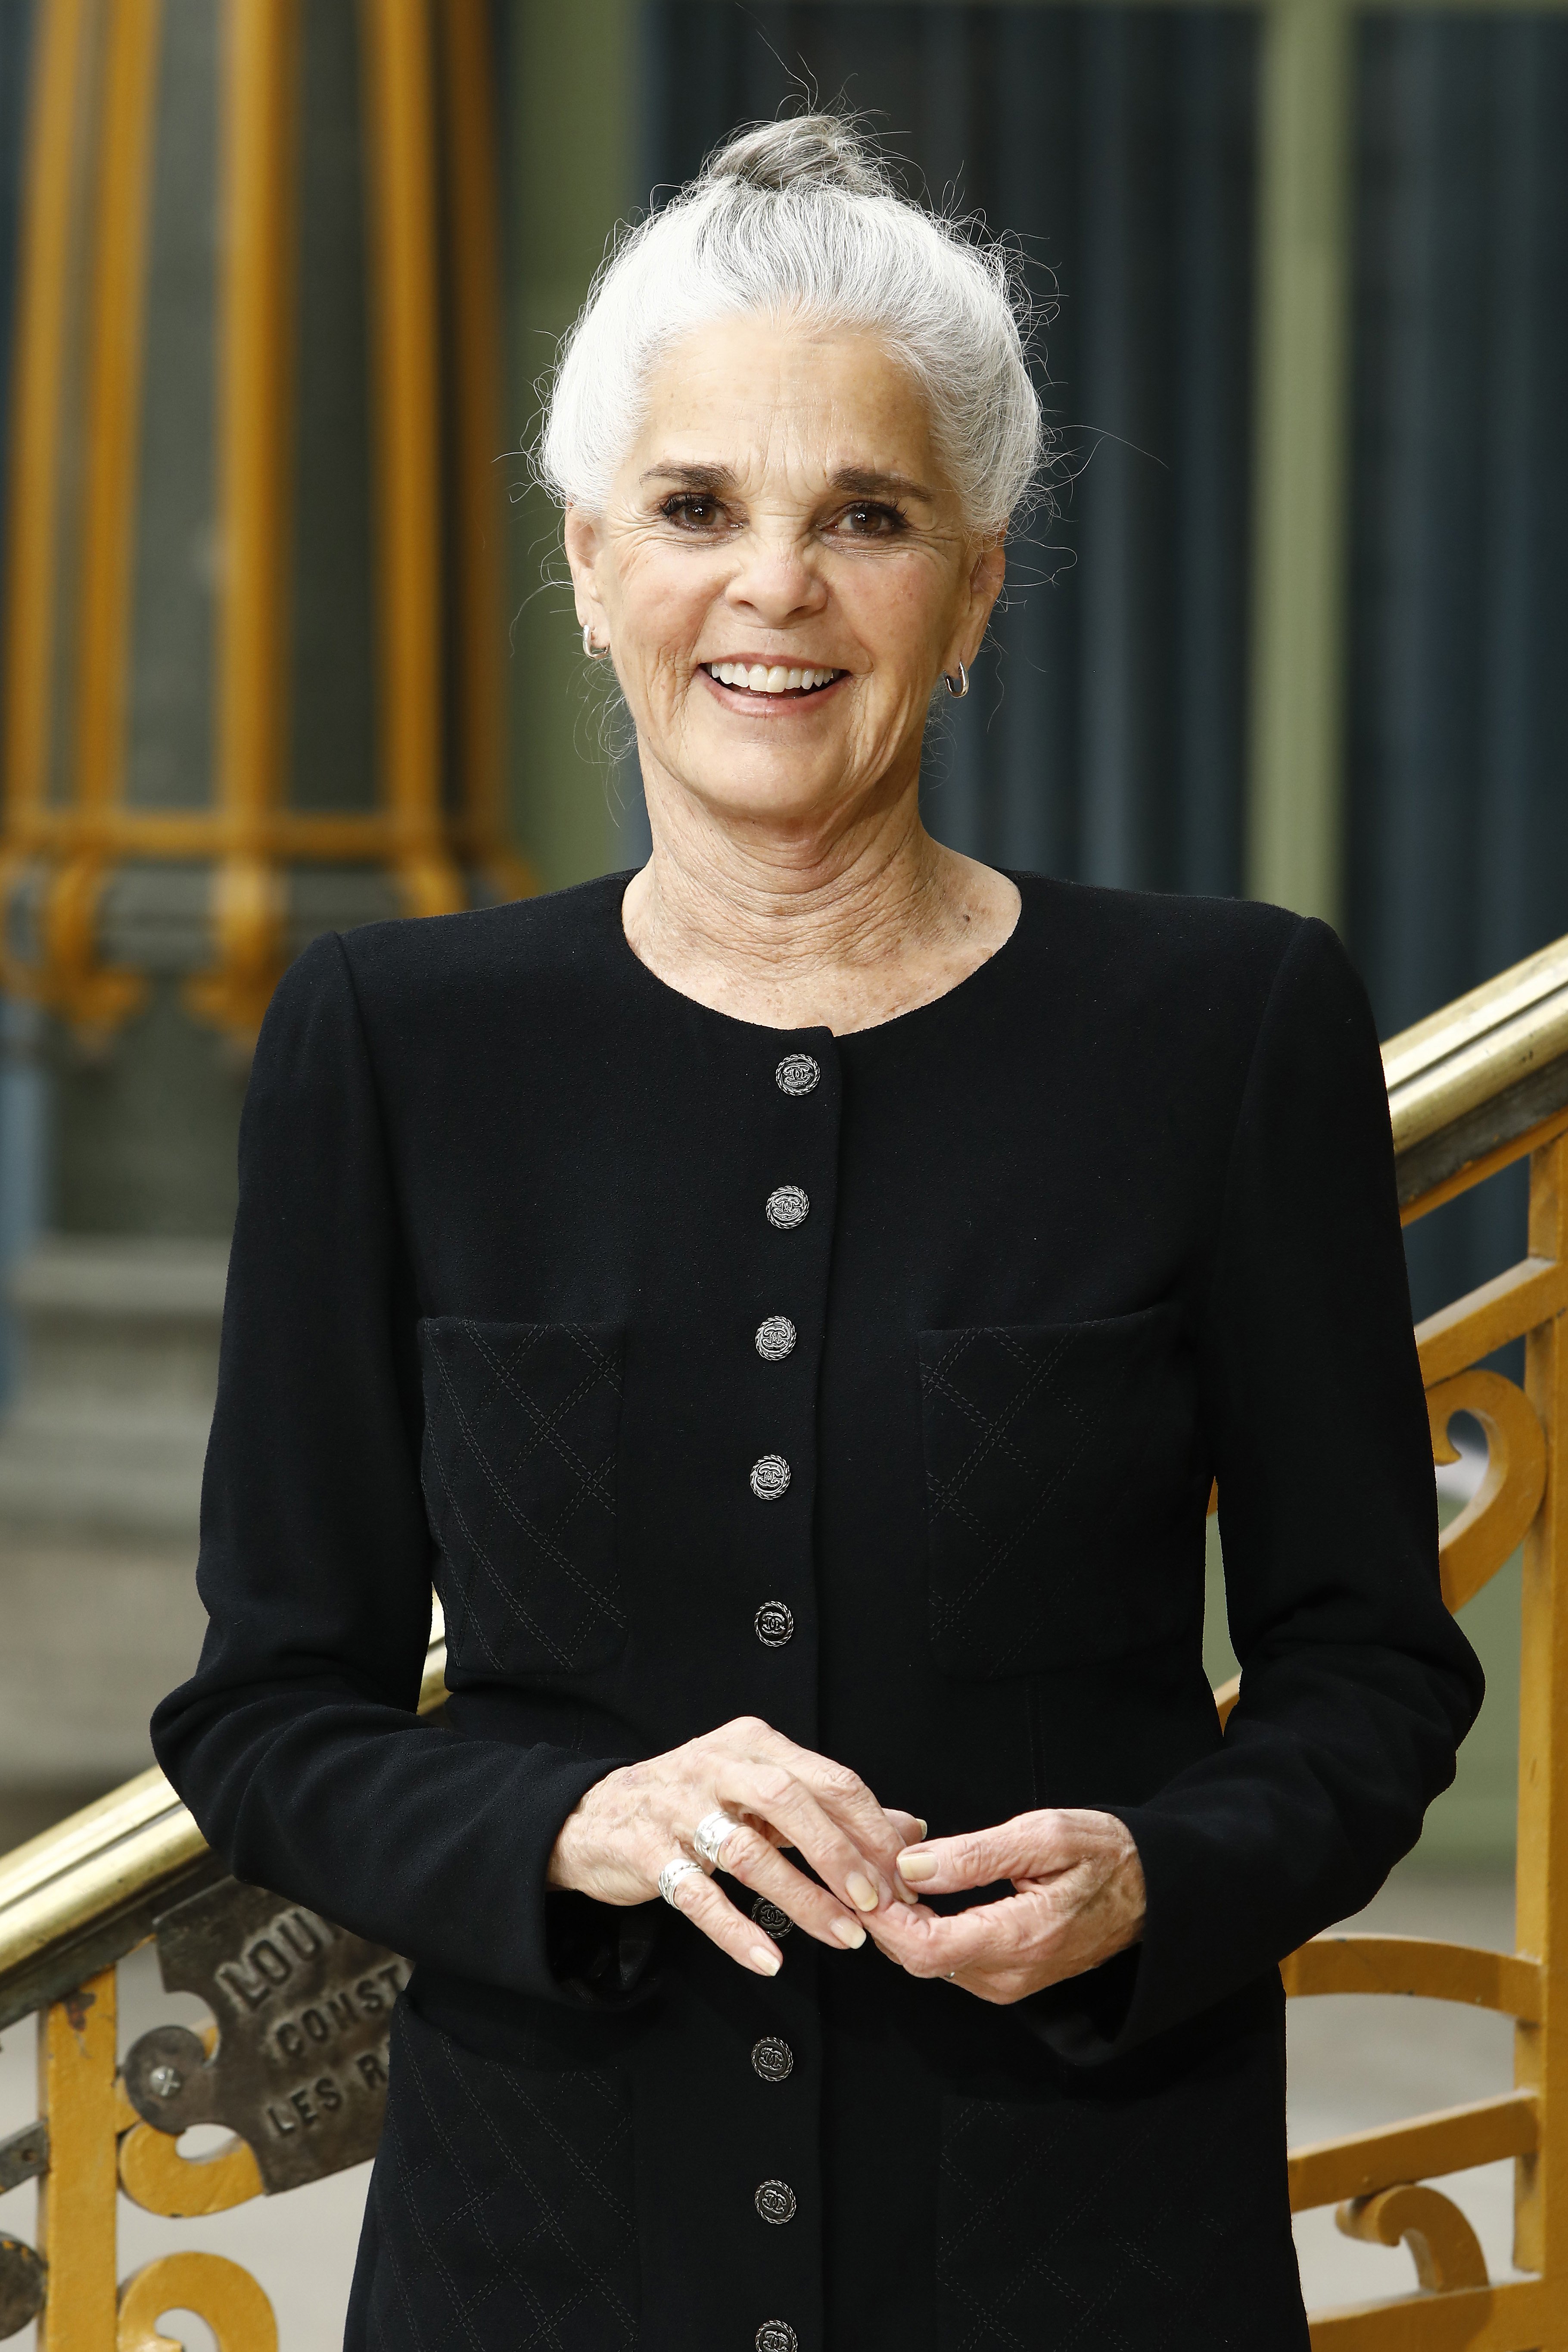 Ali MacGraw attending the Chanel Cruise 2020 Collection Photocall In Le Grand Palais on May 3, 2019 in Paris, France. / Source: Getty Images